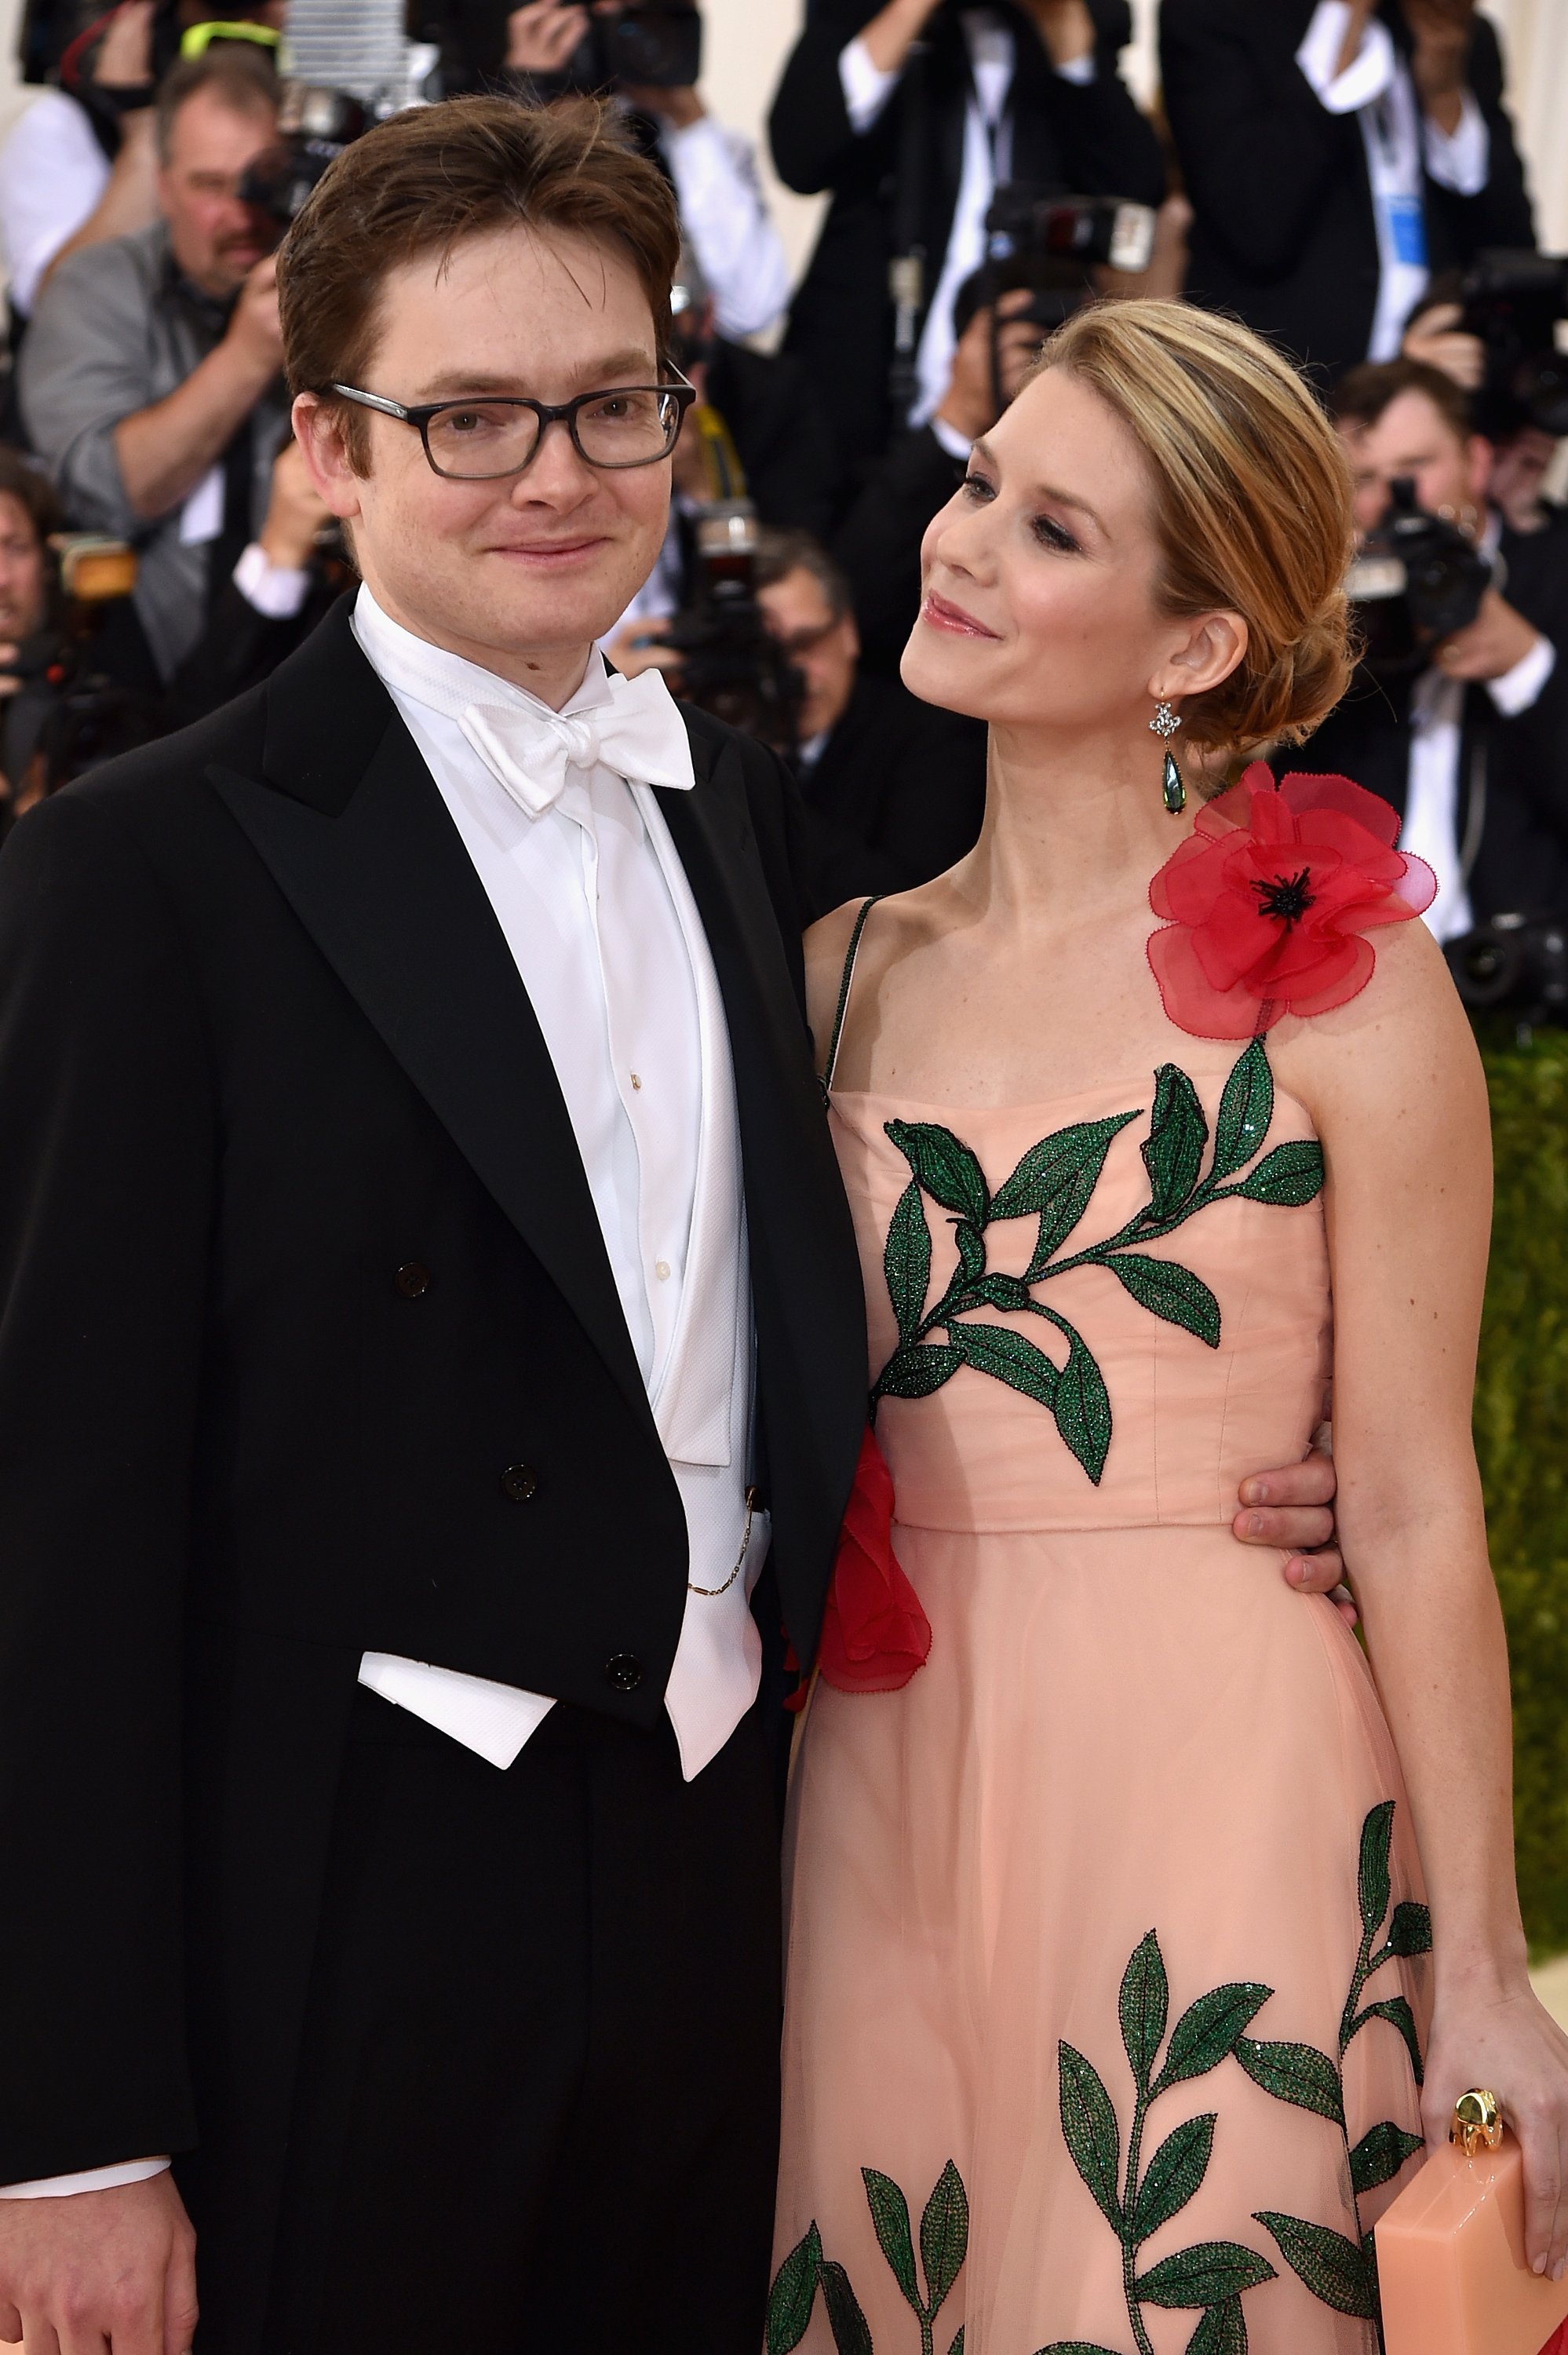 Charles Shaffer and Elizabeth Cordry pose at the "Manus x Machina: Fashion In An Age Of Technology" Costume Institute Gala at Metropolitan Museum of Art on May 2, 2016, in New York City | source: Getty Images